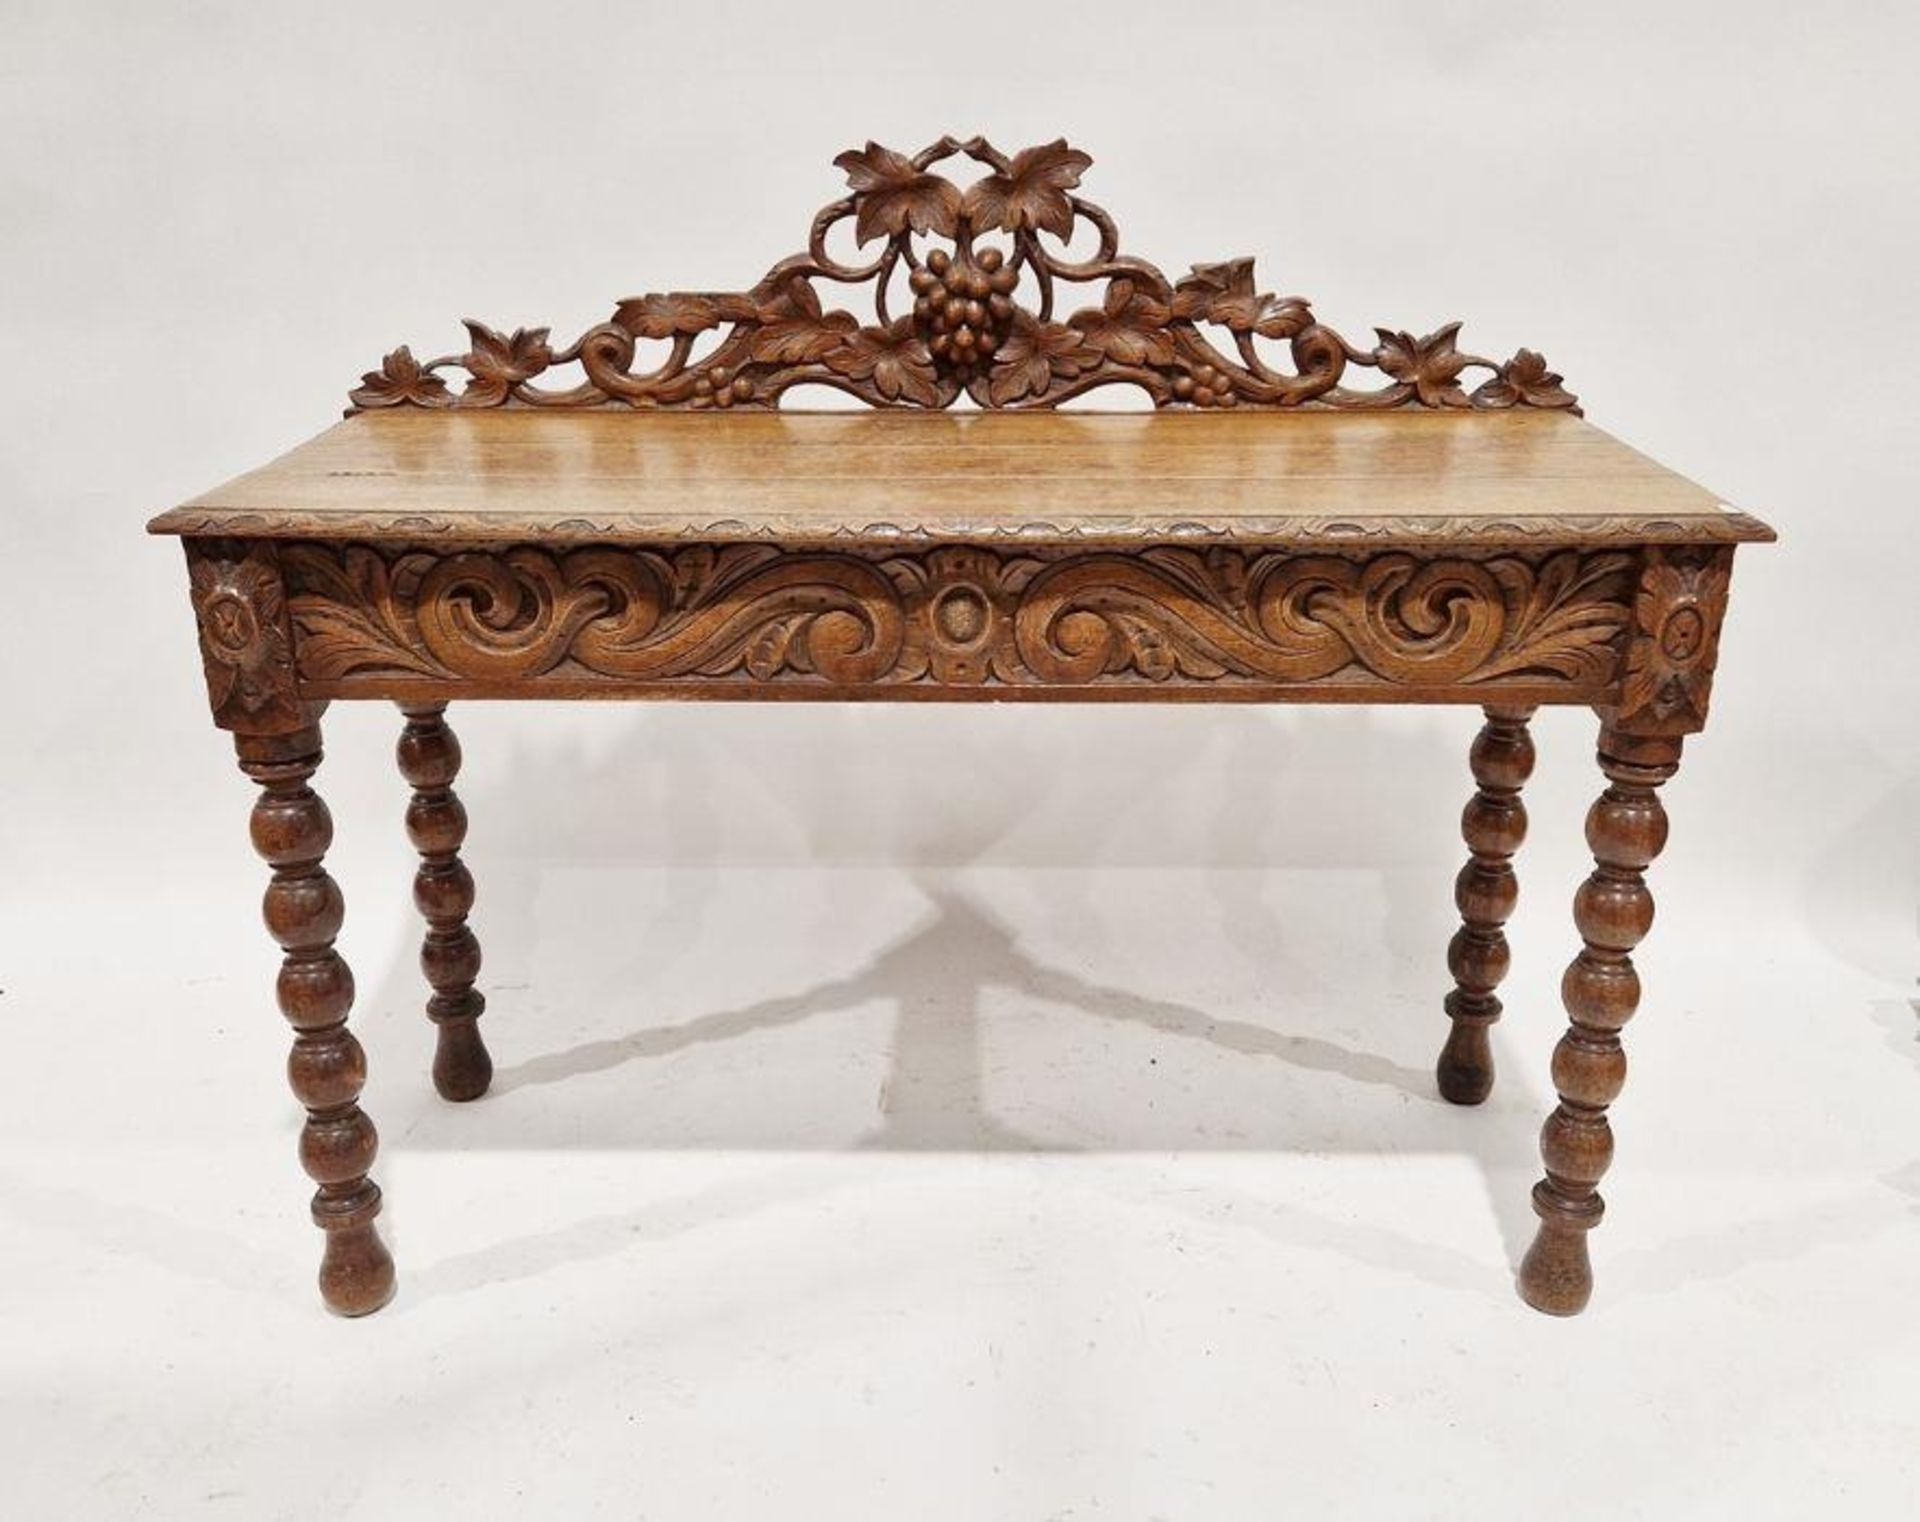 Console Table  Mid 19th Century Scottish, Oak With Carved Decoration, This Side Table Dates To Circa